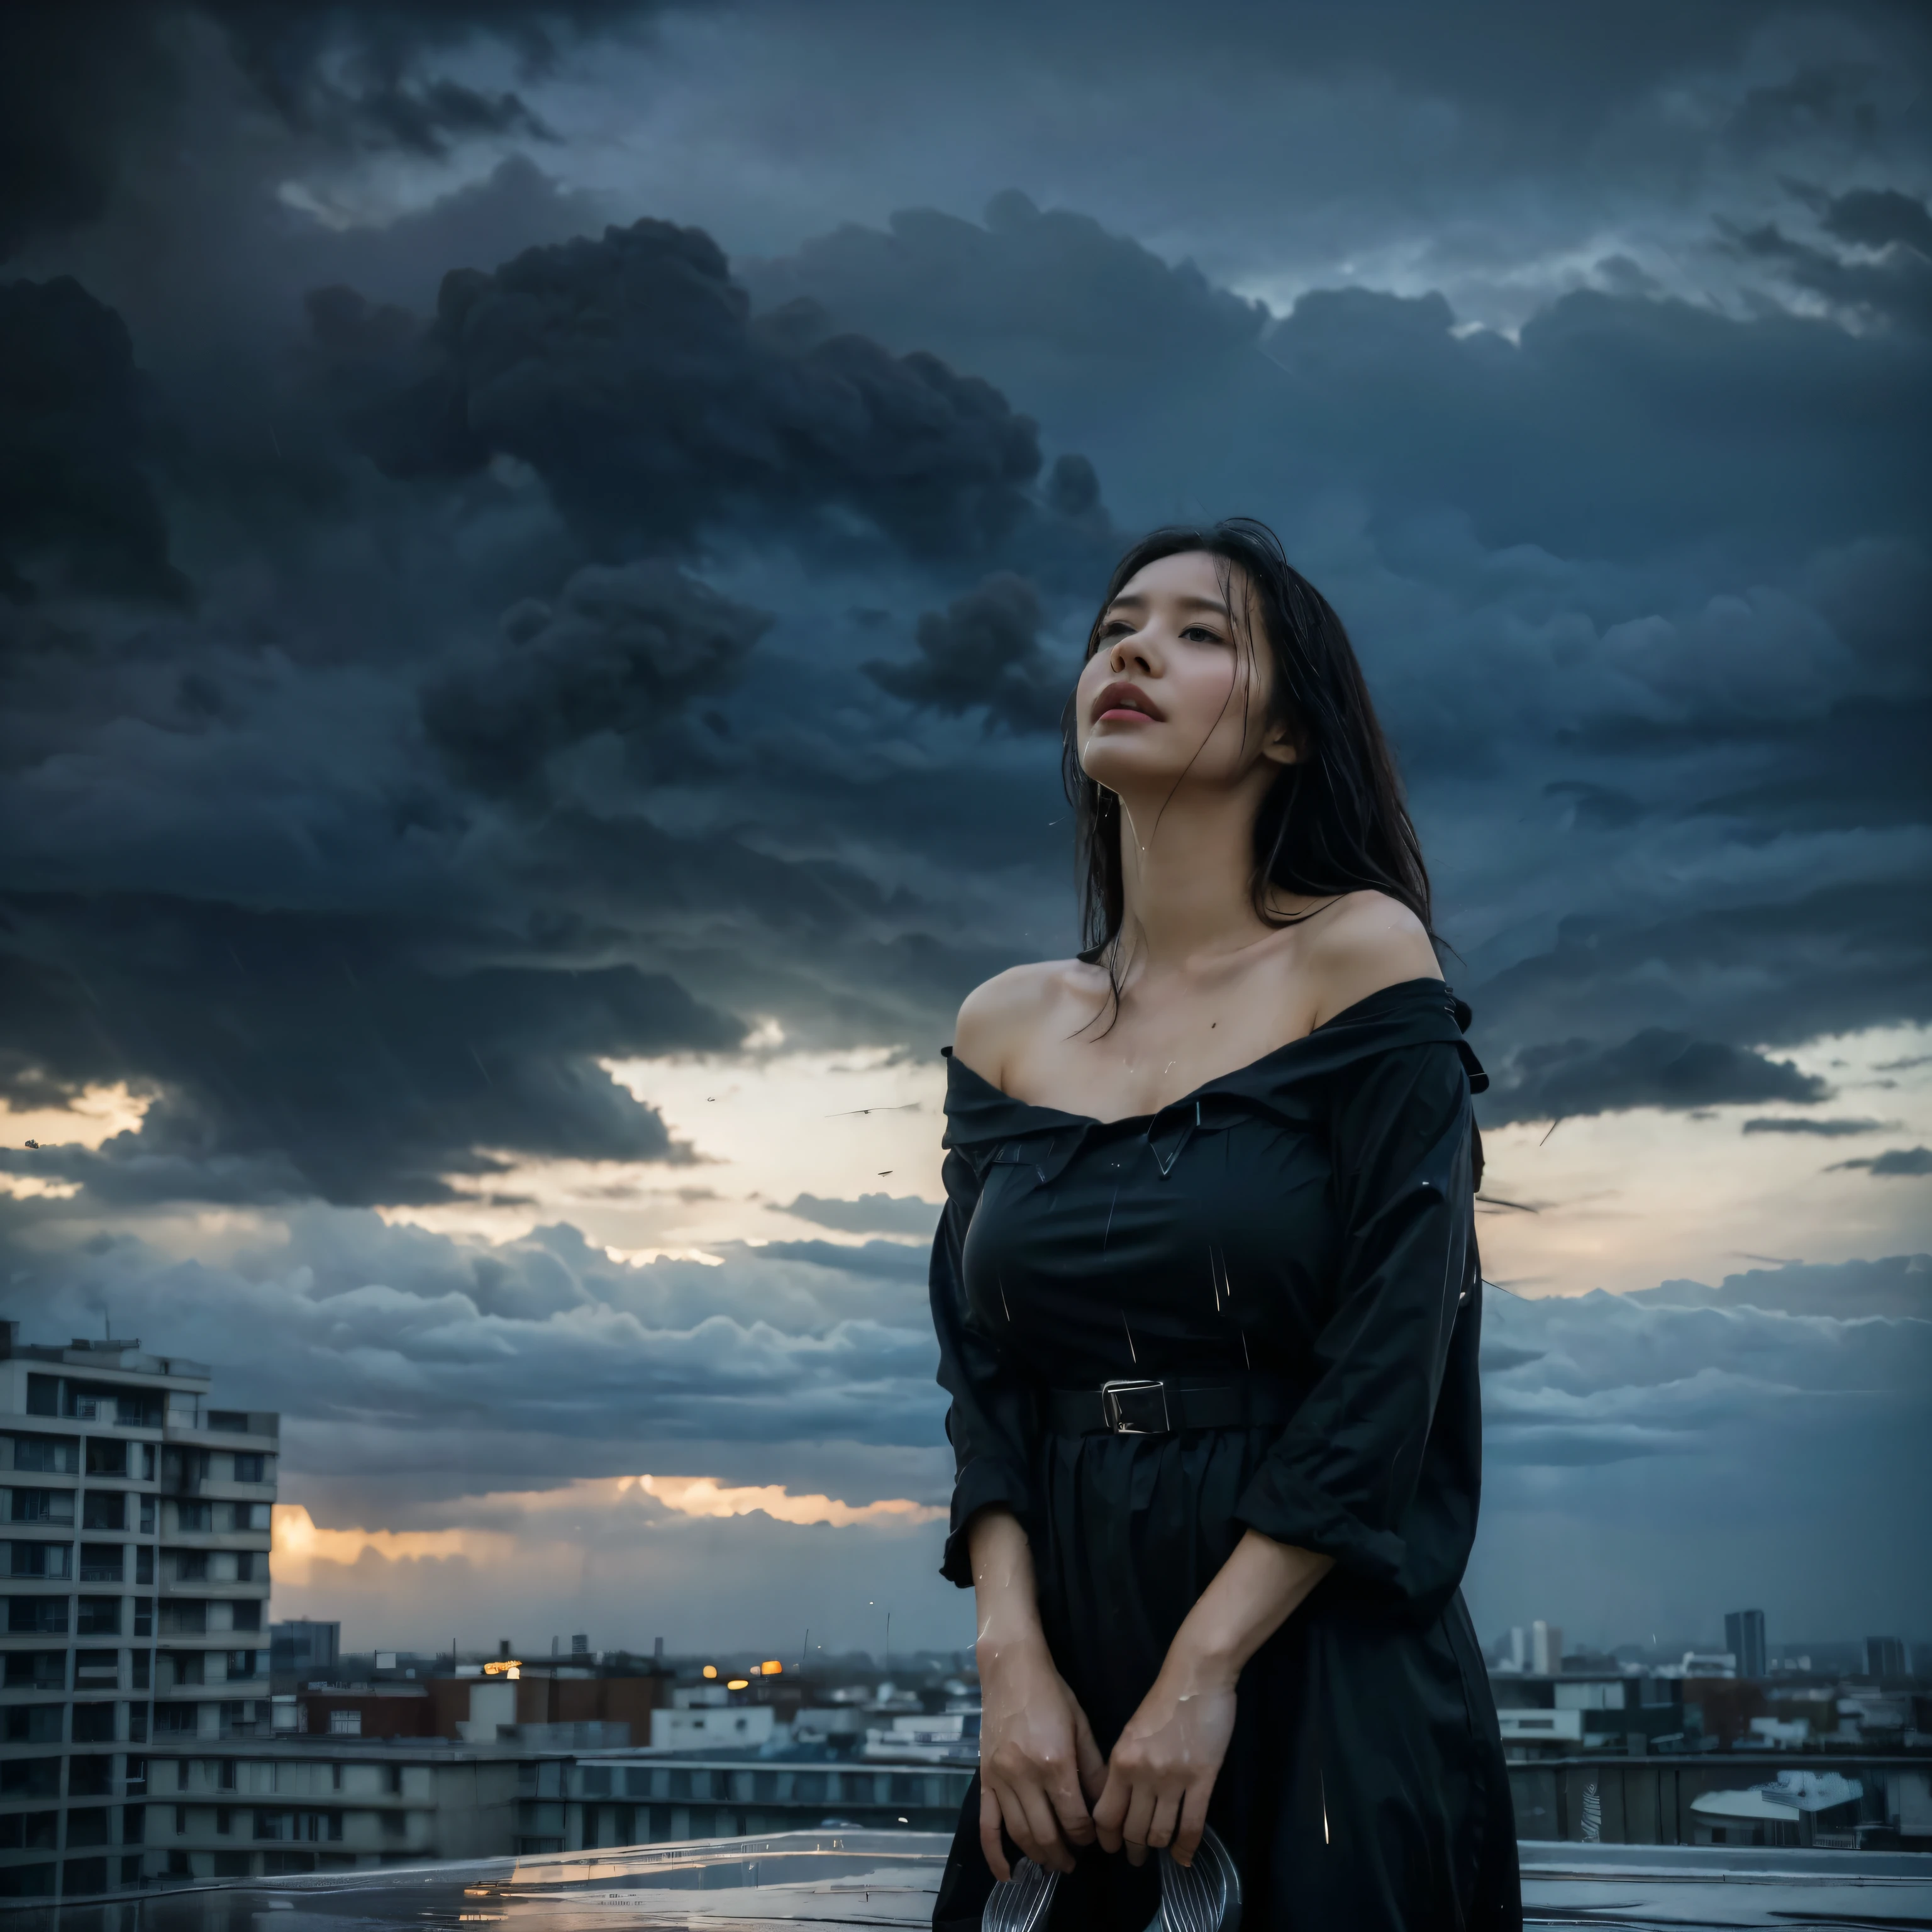 (highest quality、4K、High resolution)、Portrait、Beautifully detailed eyes、Perfectly shaped nose、Full and seductive lips、Shiny wet hair、A visually striking face、Ideal Body Proportions、Feminine and primitive lace dress、Stand on a rooftop and look out over the city skyline、Tall modern skyscrapers、There was a strong wind blowing.、(Heavy rain is pouring down from the dark clouds:1.6)、Dramatic lightning lit up the sky、My wet clothes were sticking to my body、Kneeling gracefully and confidently on the rooftop、Dresses fluttering in the wind、Eyes staring straight into the camera lens、It creates a fascinating and powerful connection.